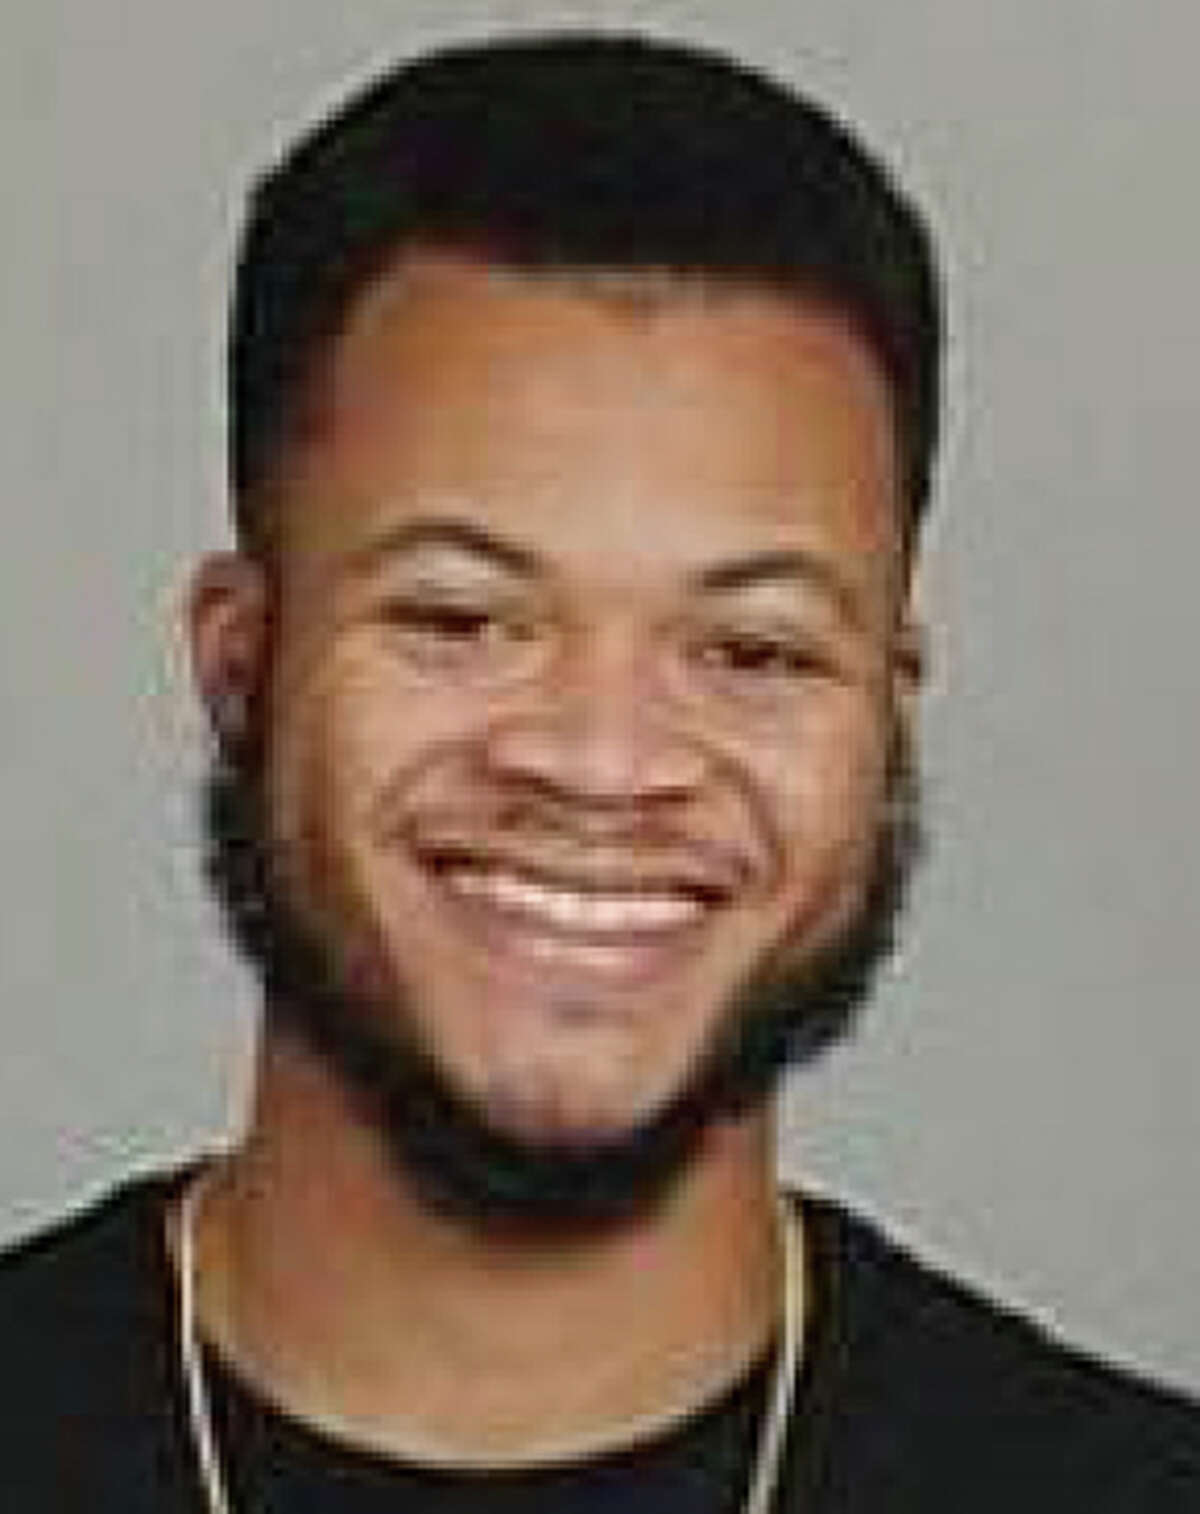 Carl Conyers was last seen by his roommate at their apartment.